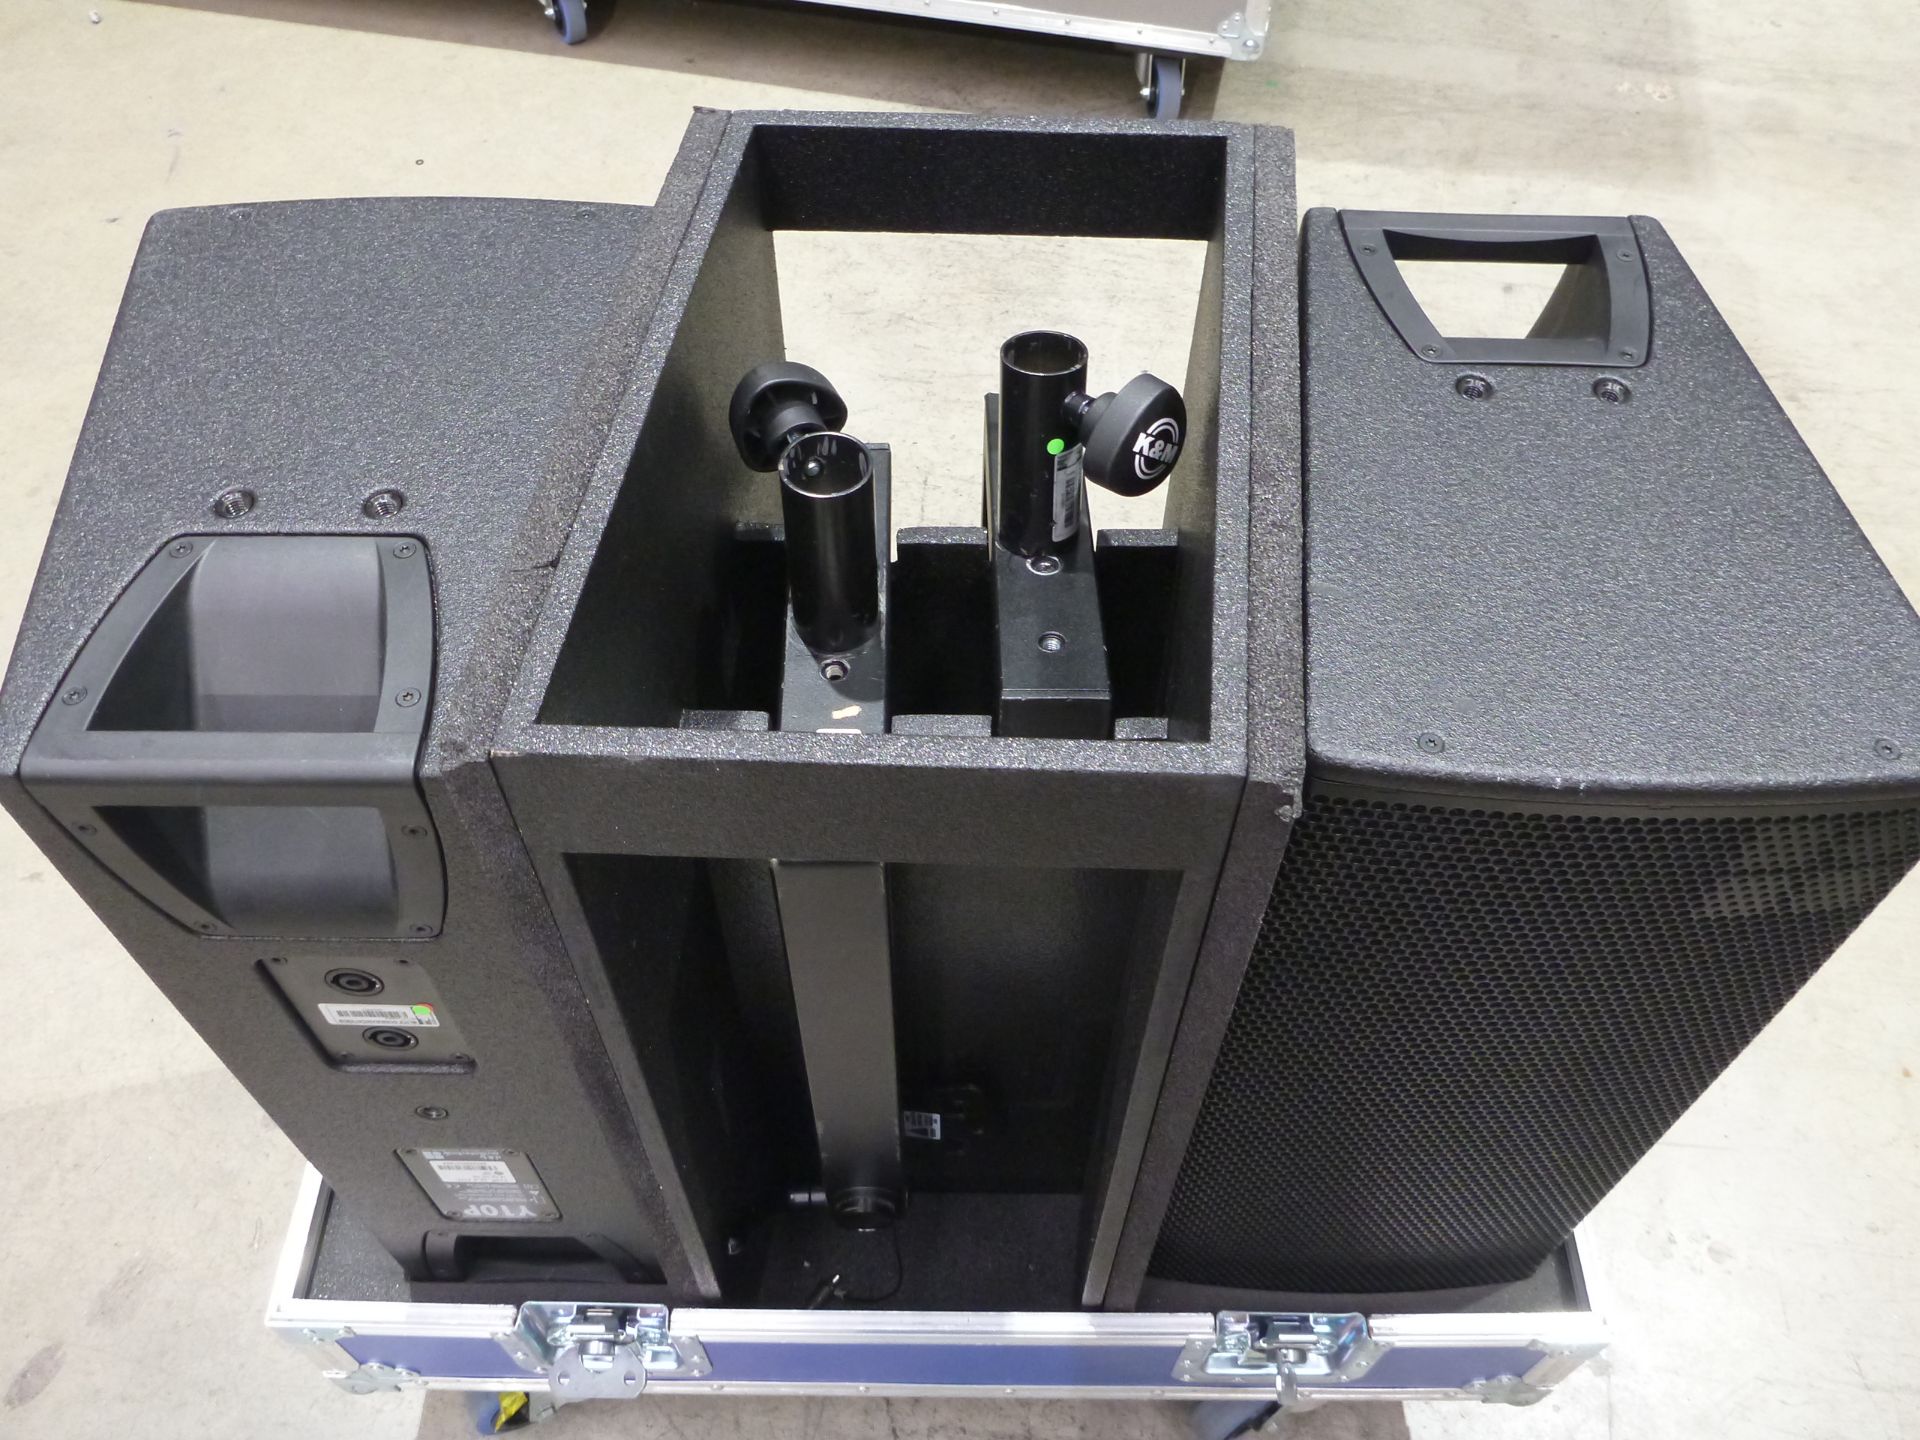 D & B Audiotecknik Y10P Loudspeakers (Pair) In flight case with flying frame, top hat and safety - Image 6 of 7